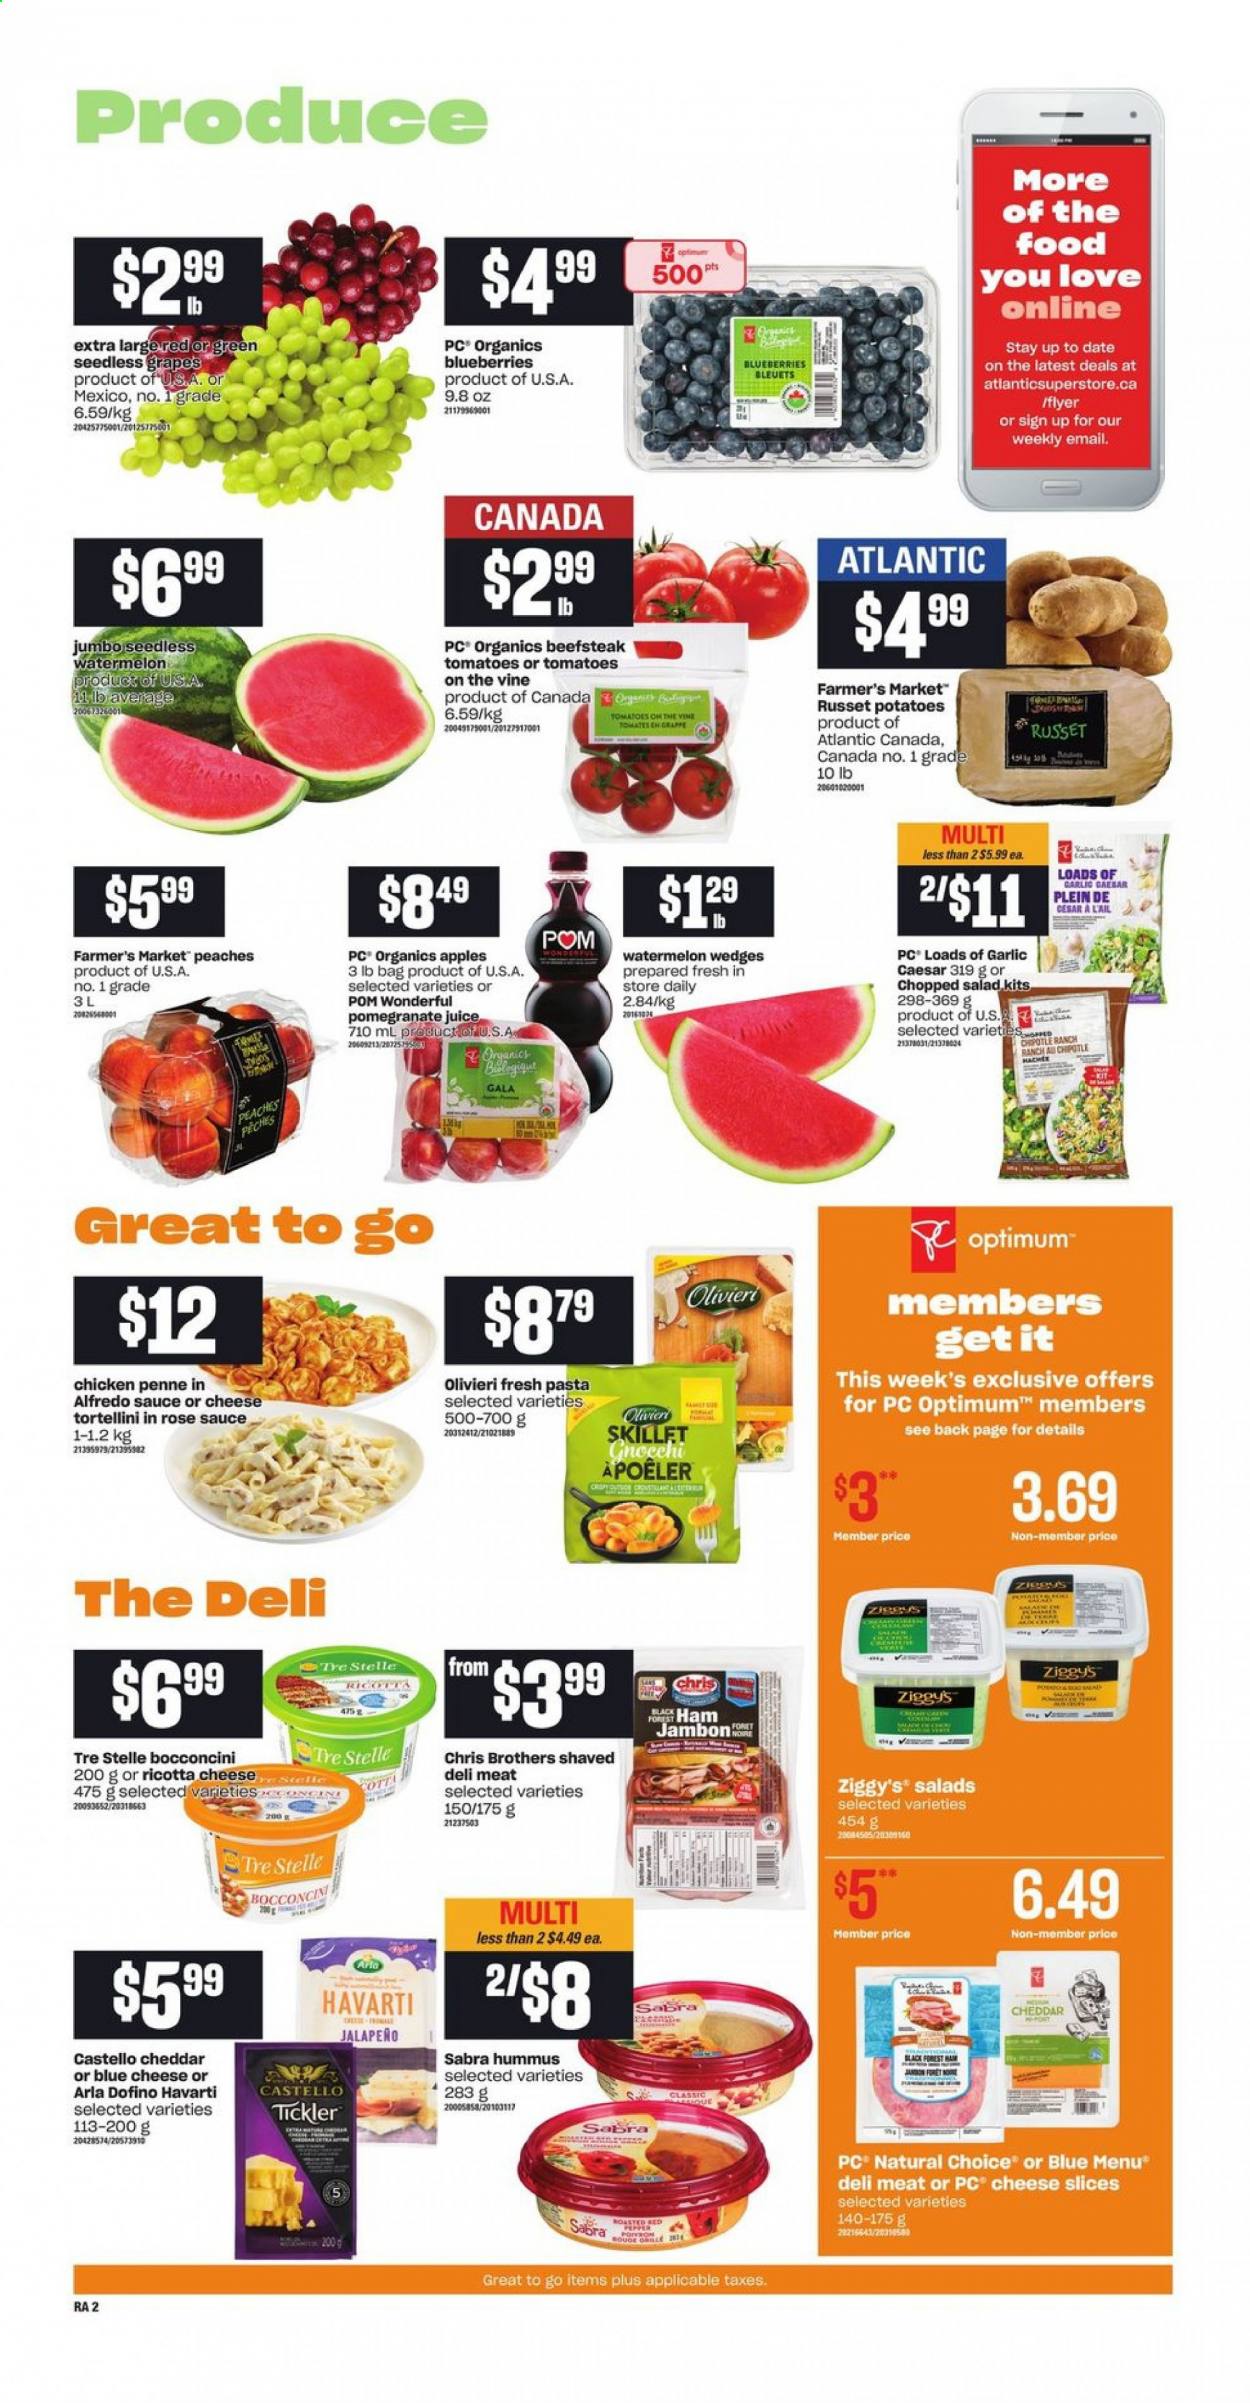 thumbnail - Atlantic Superstore Flyer - July 15, 2021 - July 21, 2021 - Sales products - garlic, russet potatoes, tomatoes, potatoes, salad, chopped salad, apples, blueberries, Gala, grapes, seedless grapes, watermelon, pomegranate, peaches, tortellini, Alfredo sauce, ham, hummus, blue cheese, bocconcini, sliced cheese, Havarti, cheddar, Arla, penne, juice, rosé wine, BROTHERS, Optimum, rose, ricotta. Page 3.